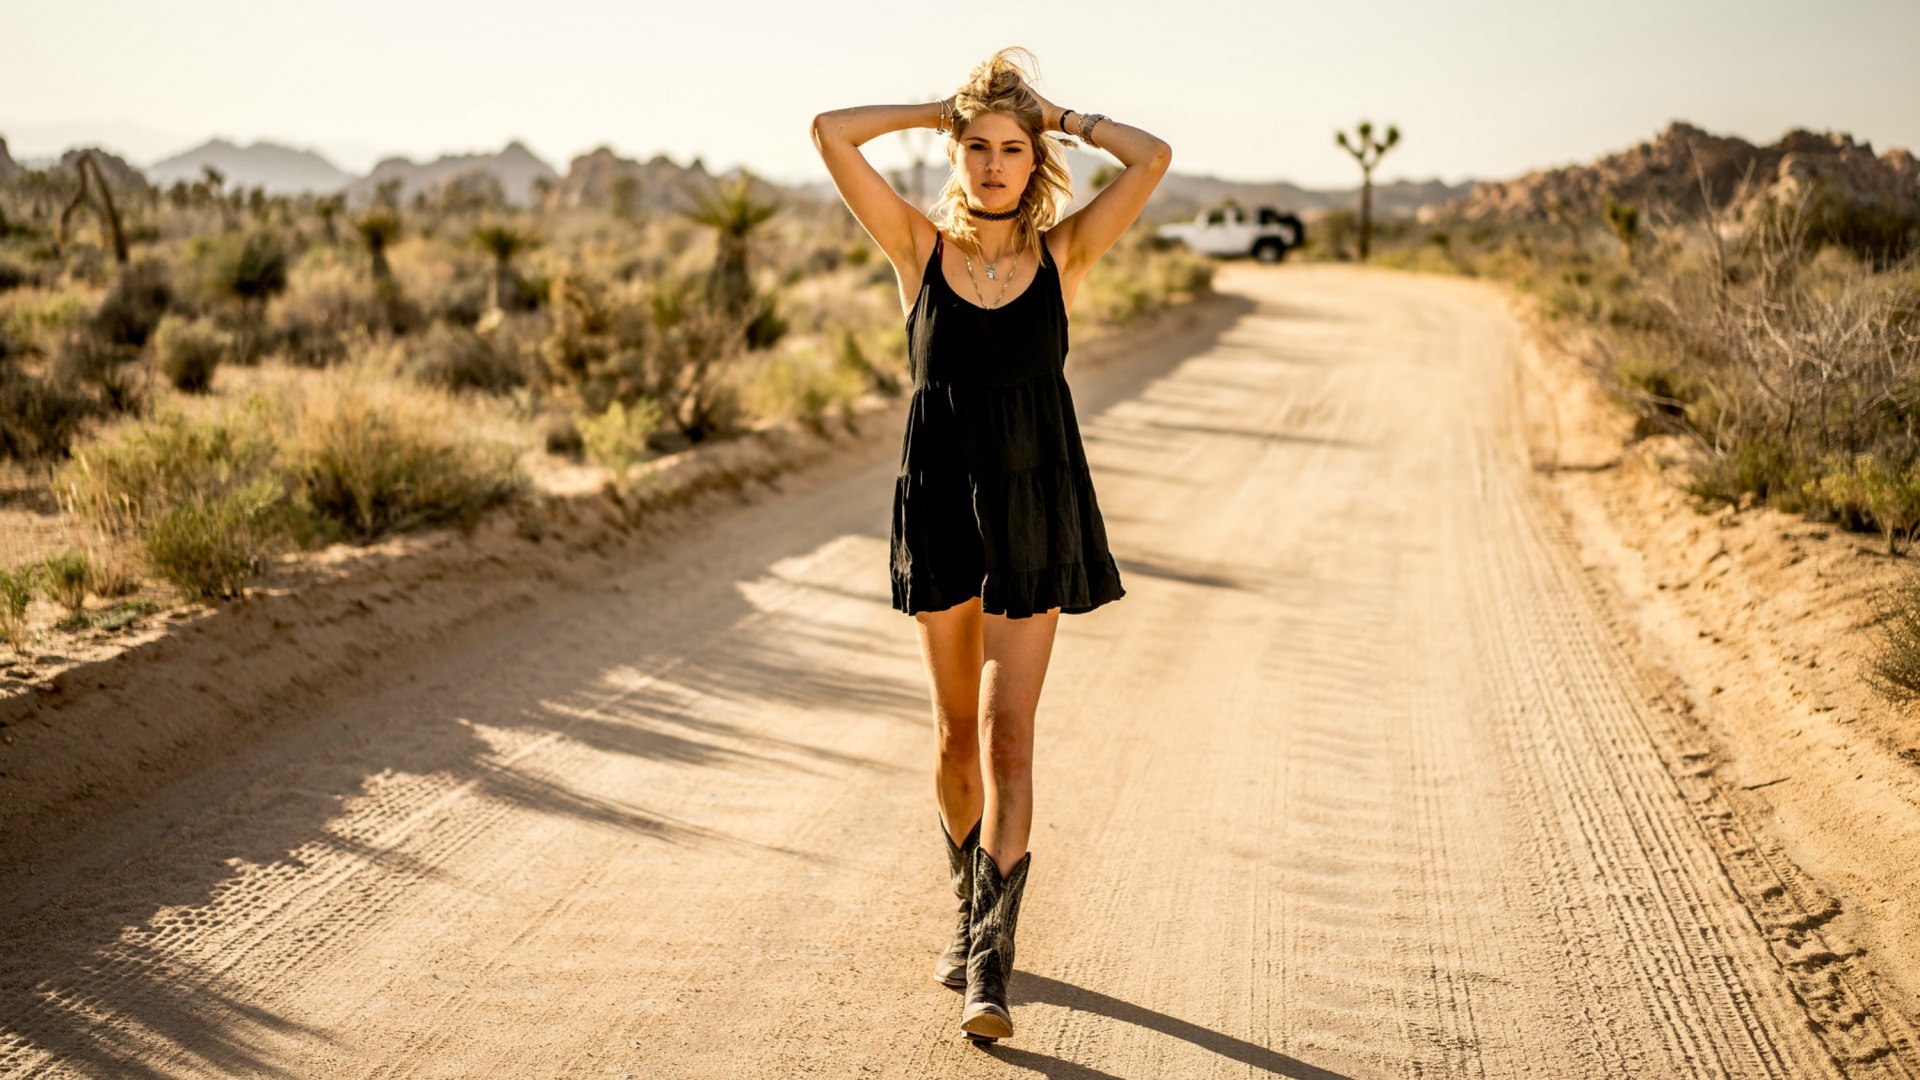 People 1920x1080 road dirt road arms up women desert women outdoors cowgirl